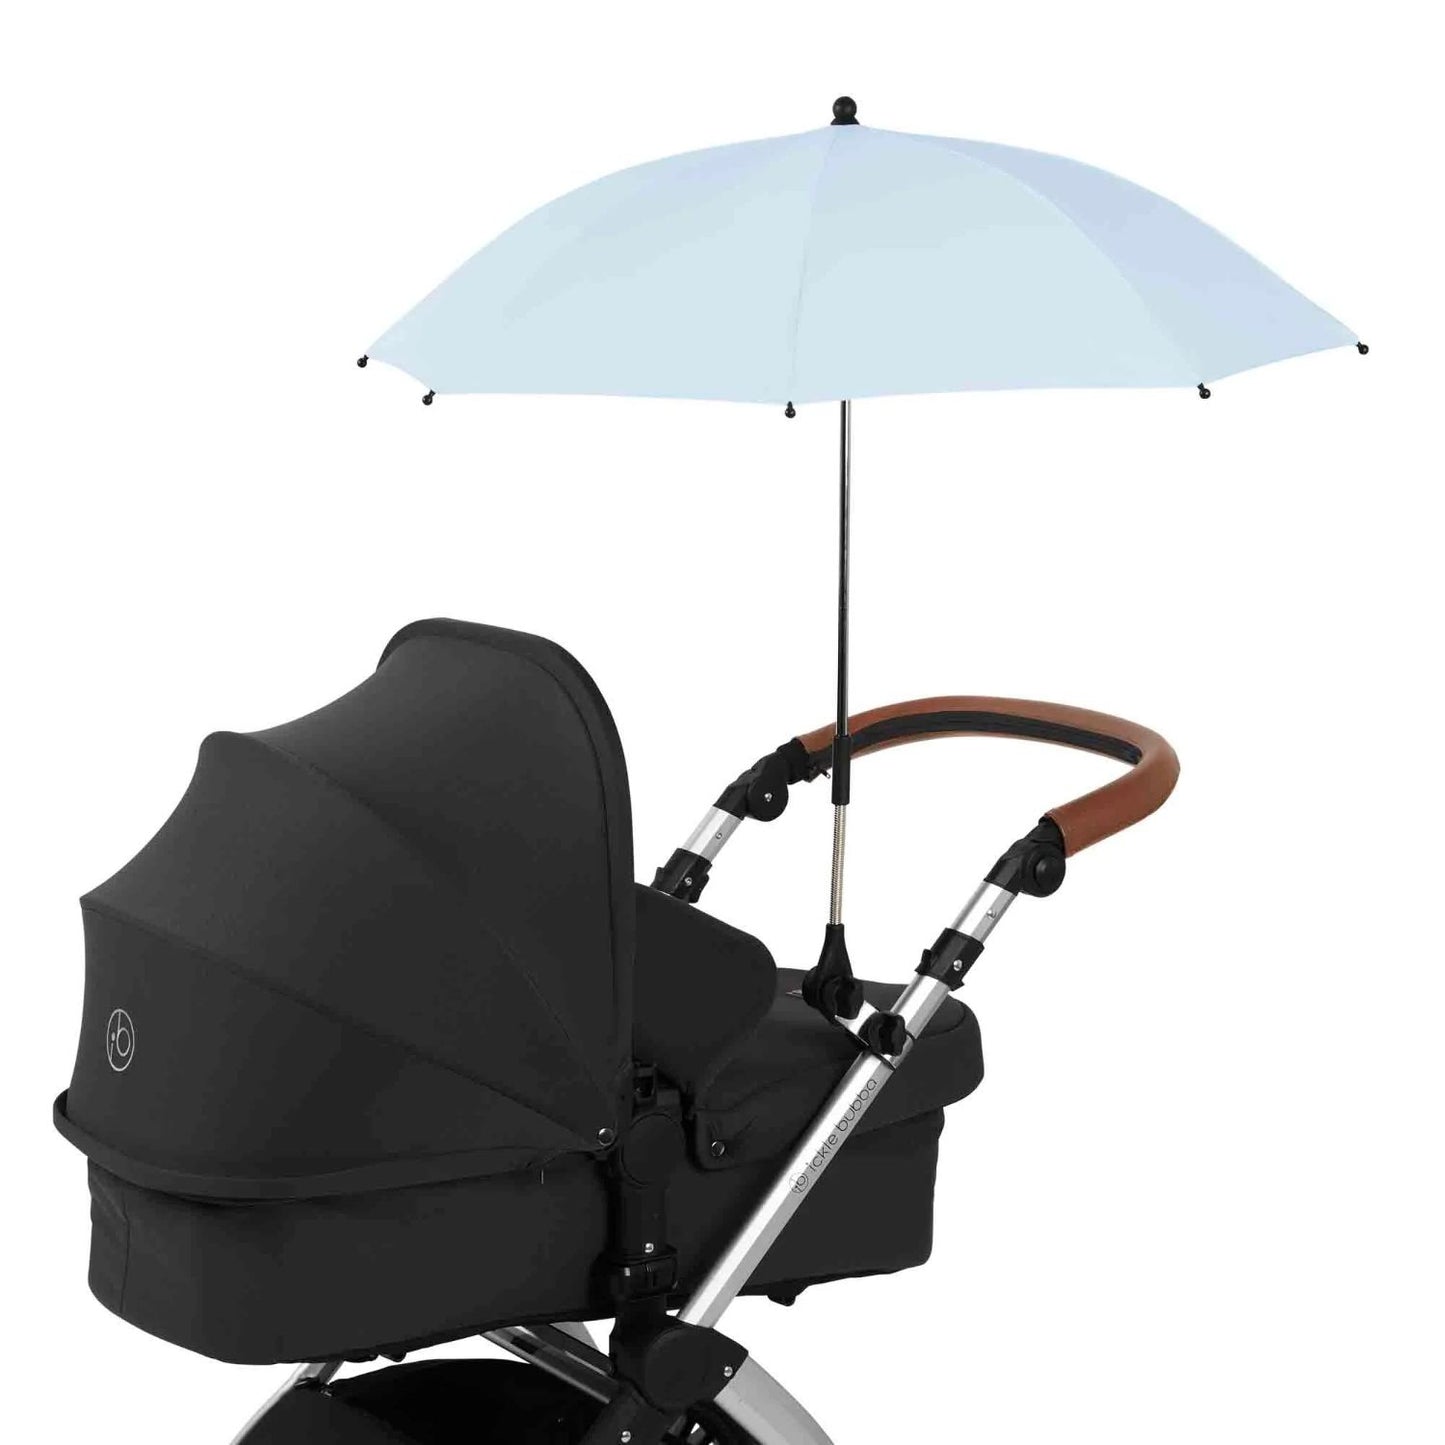 Ickle Bubba Parasol Universal Travel Accessory in Blue colour attached to a black Ickle Bubba stroller